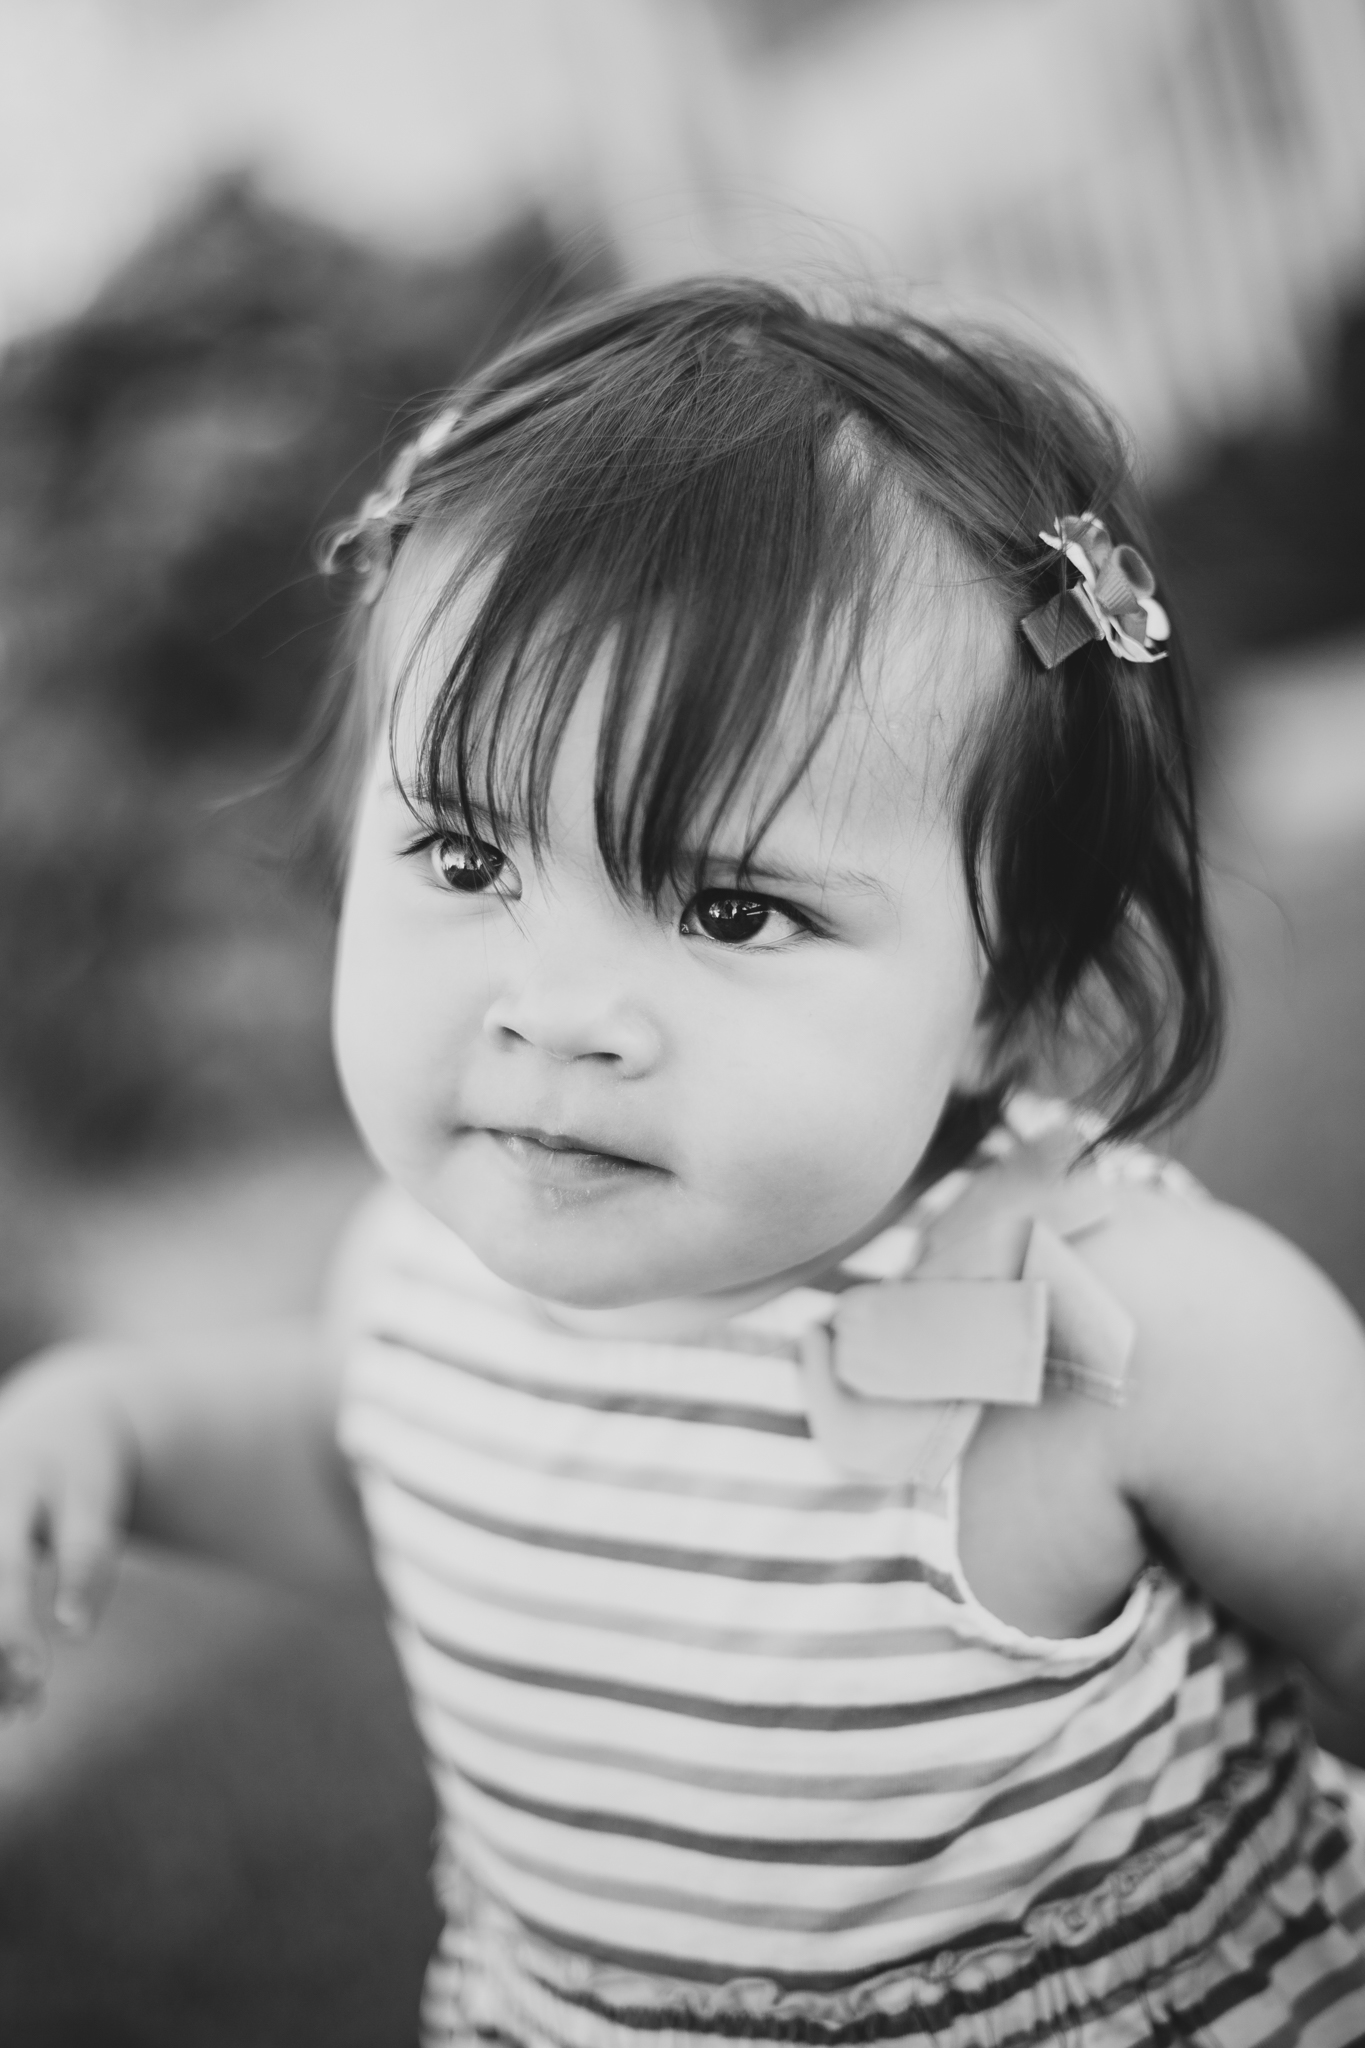 glendale-photography-baby-mae-black-and-white-portrait